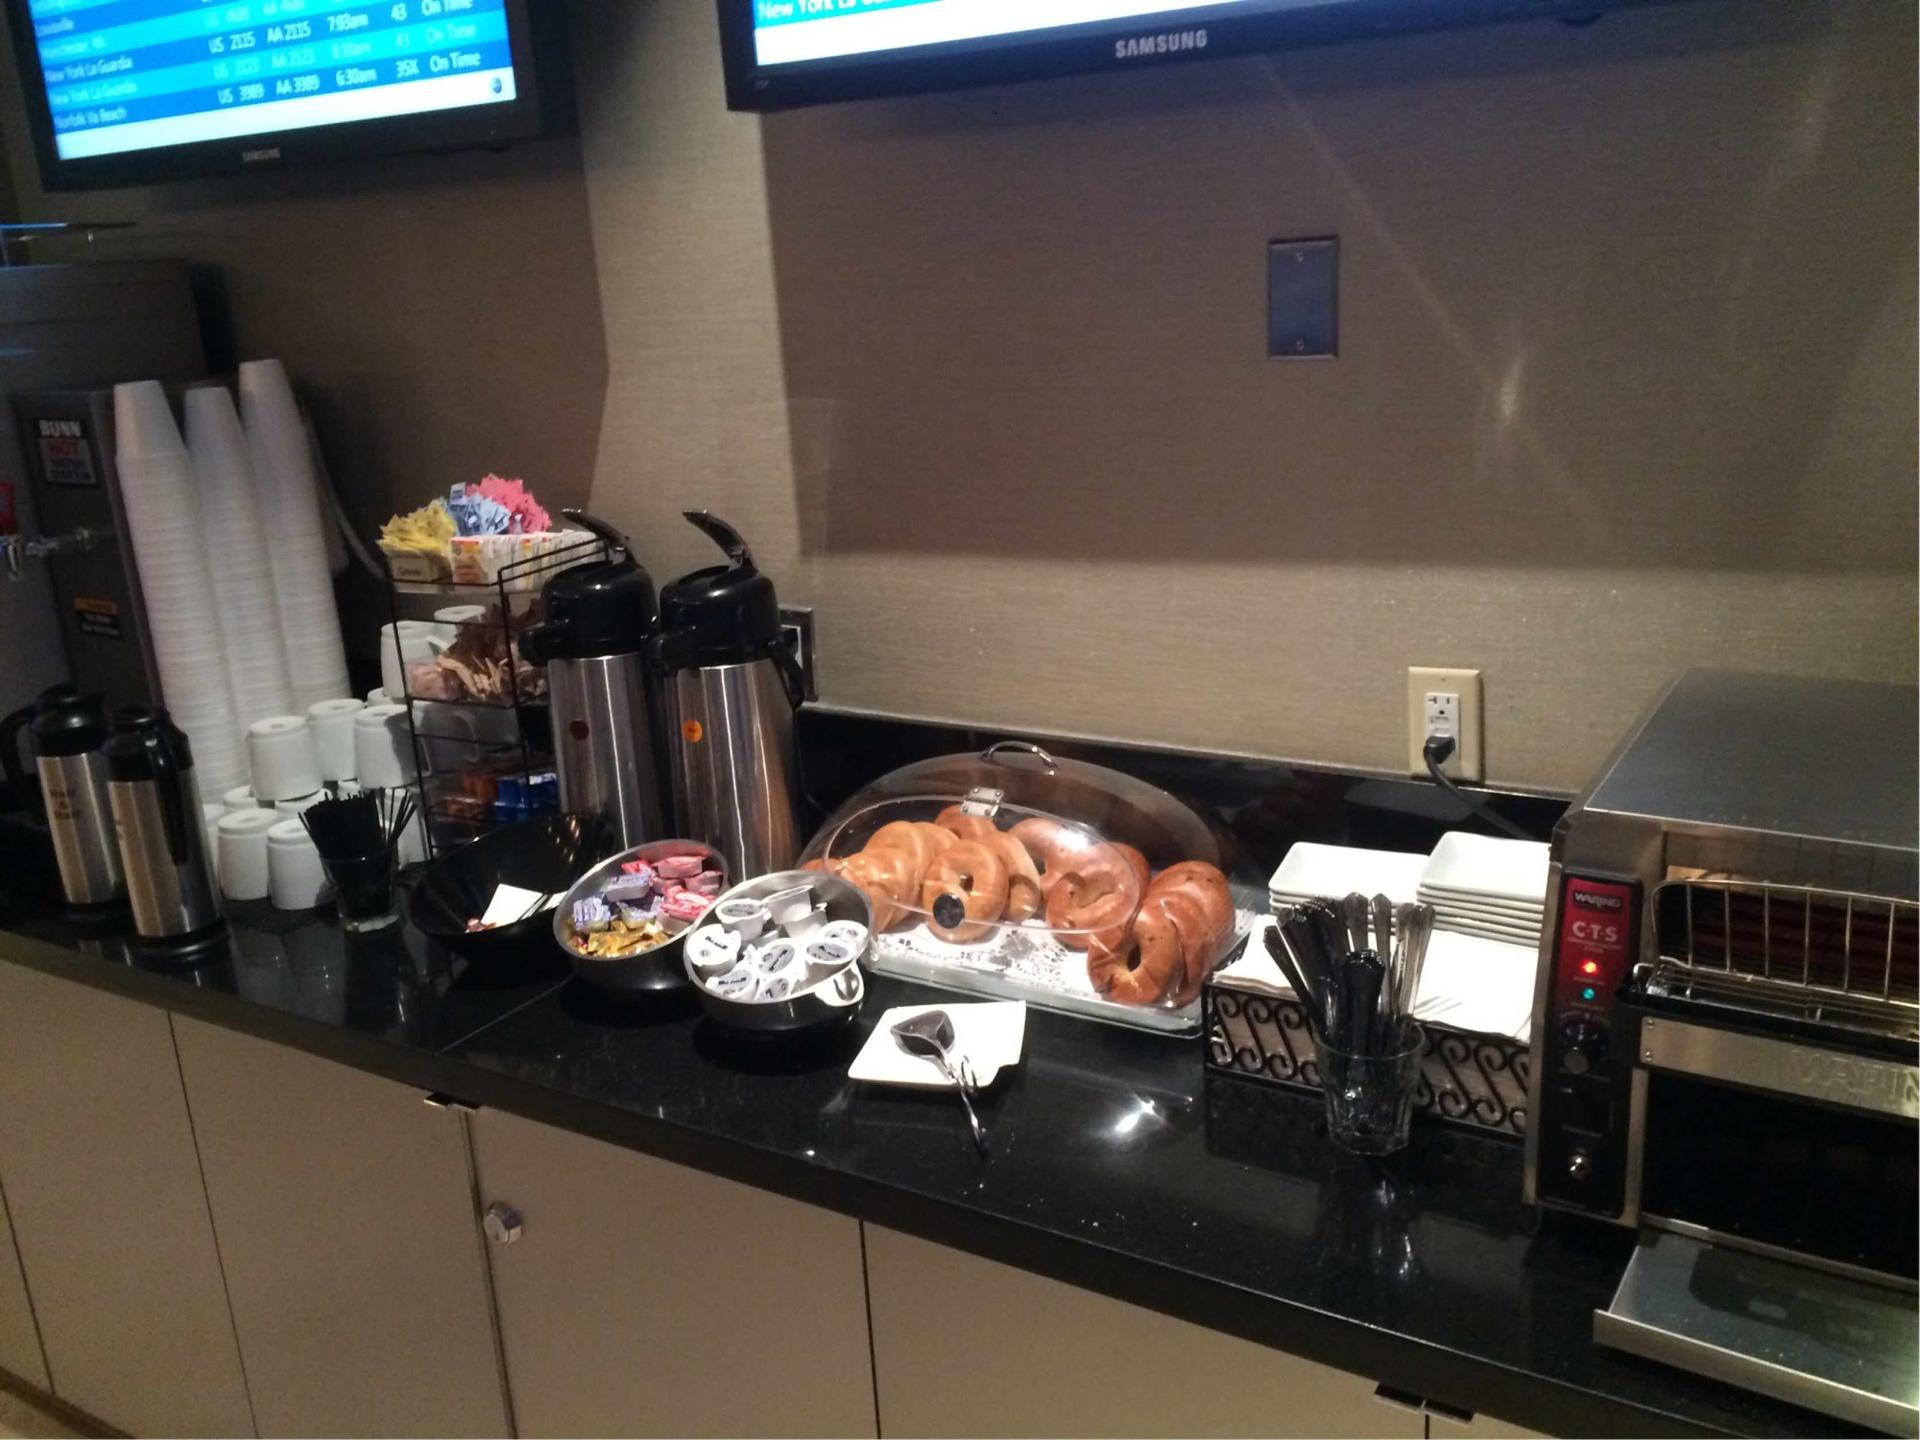 American Airlines Admirals Club image 5 of 22